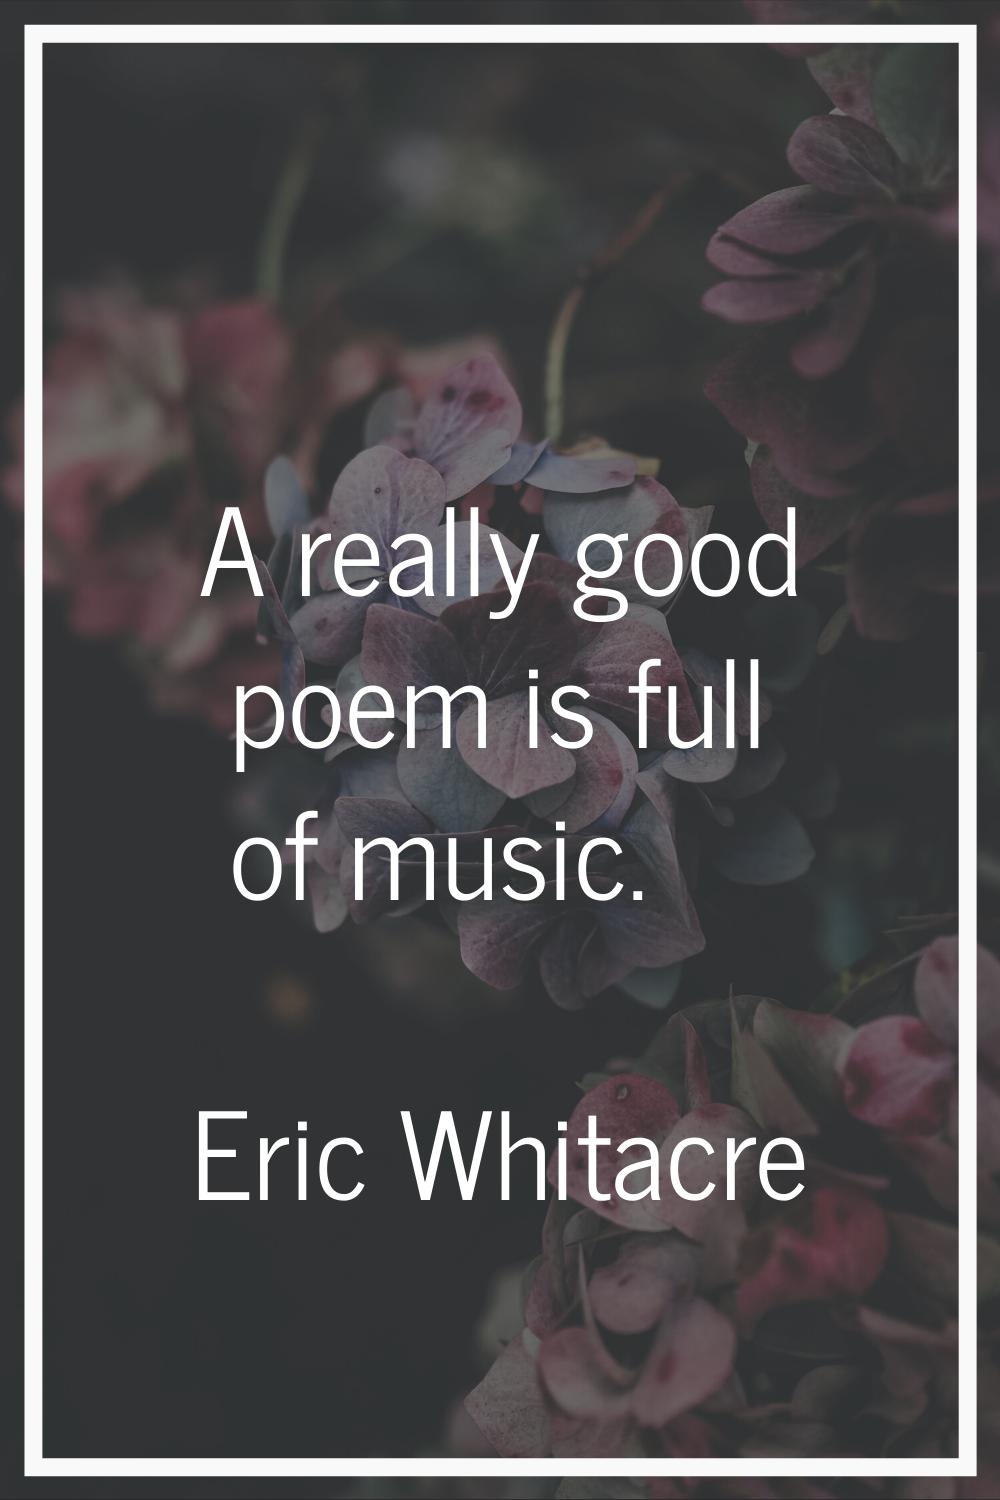 A really good poem is full of music.